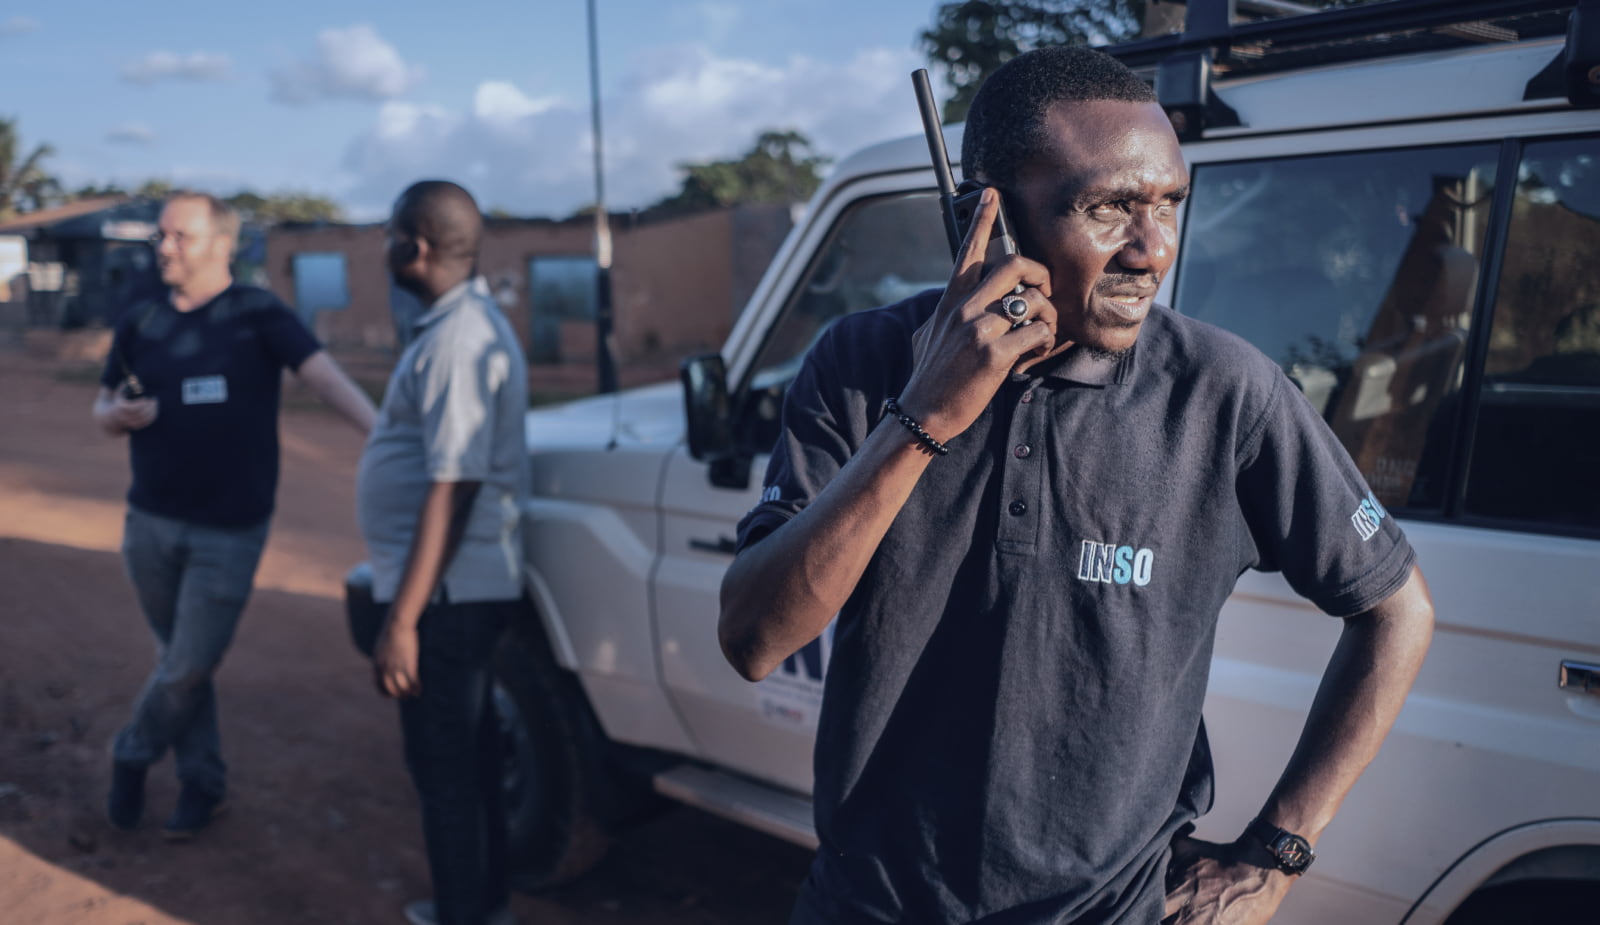 An INSO staff member uses a walkie talkie in Bangui, CAR. Credit: C. Di Roma/INSO﻿